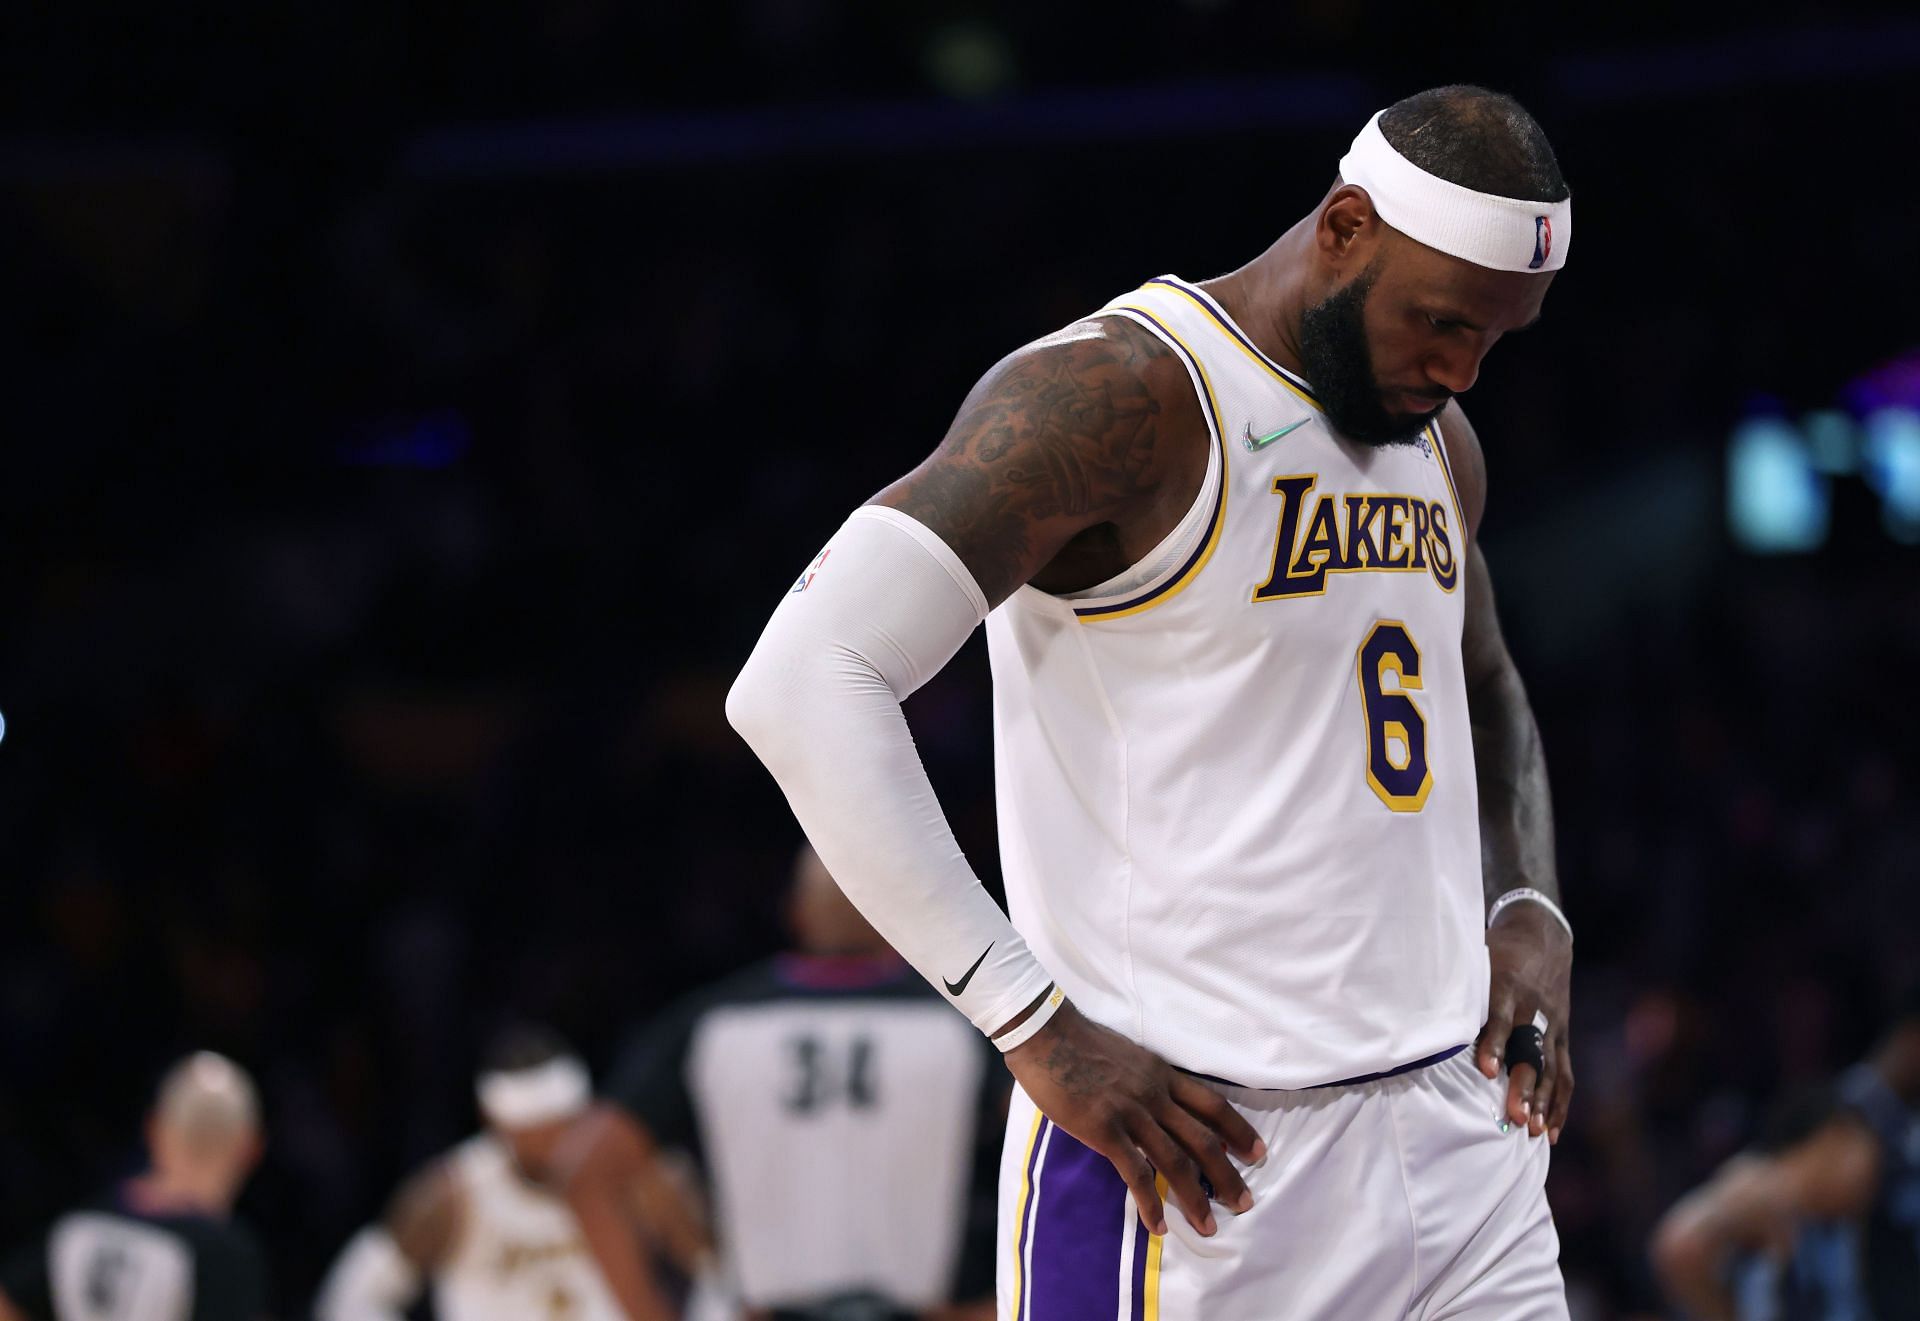 Los Angeles Lakers superstar LeBron James will be itching to get back on the court after watching the way the Lakers loss to the Thunder